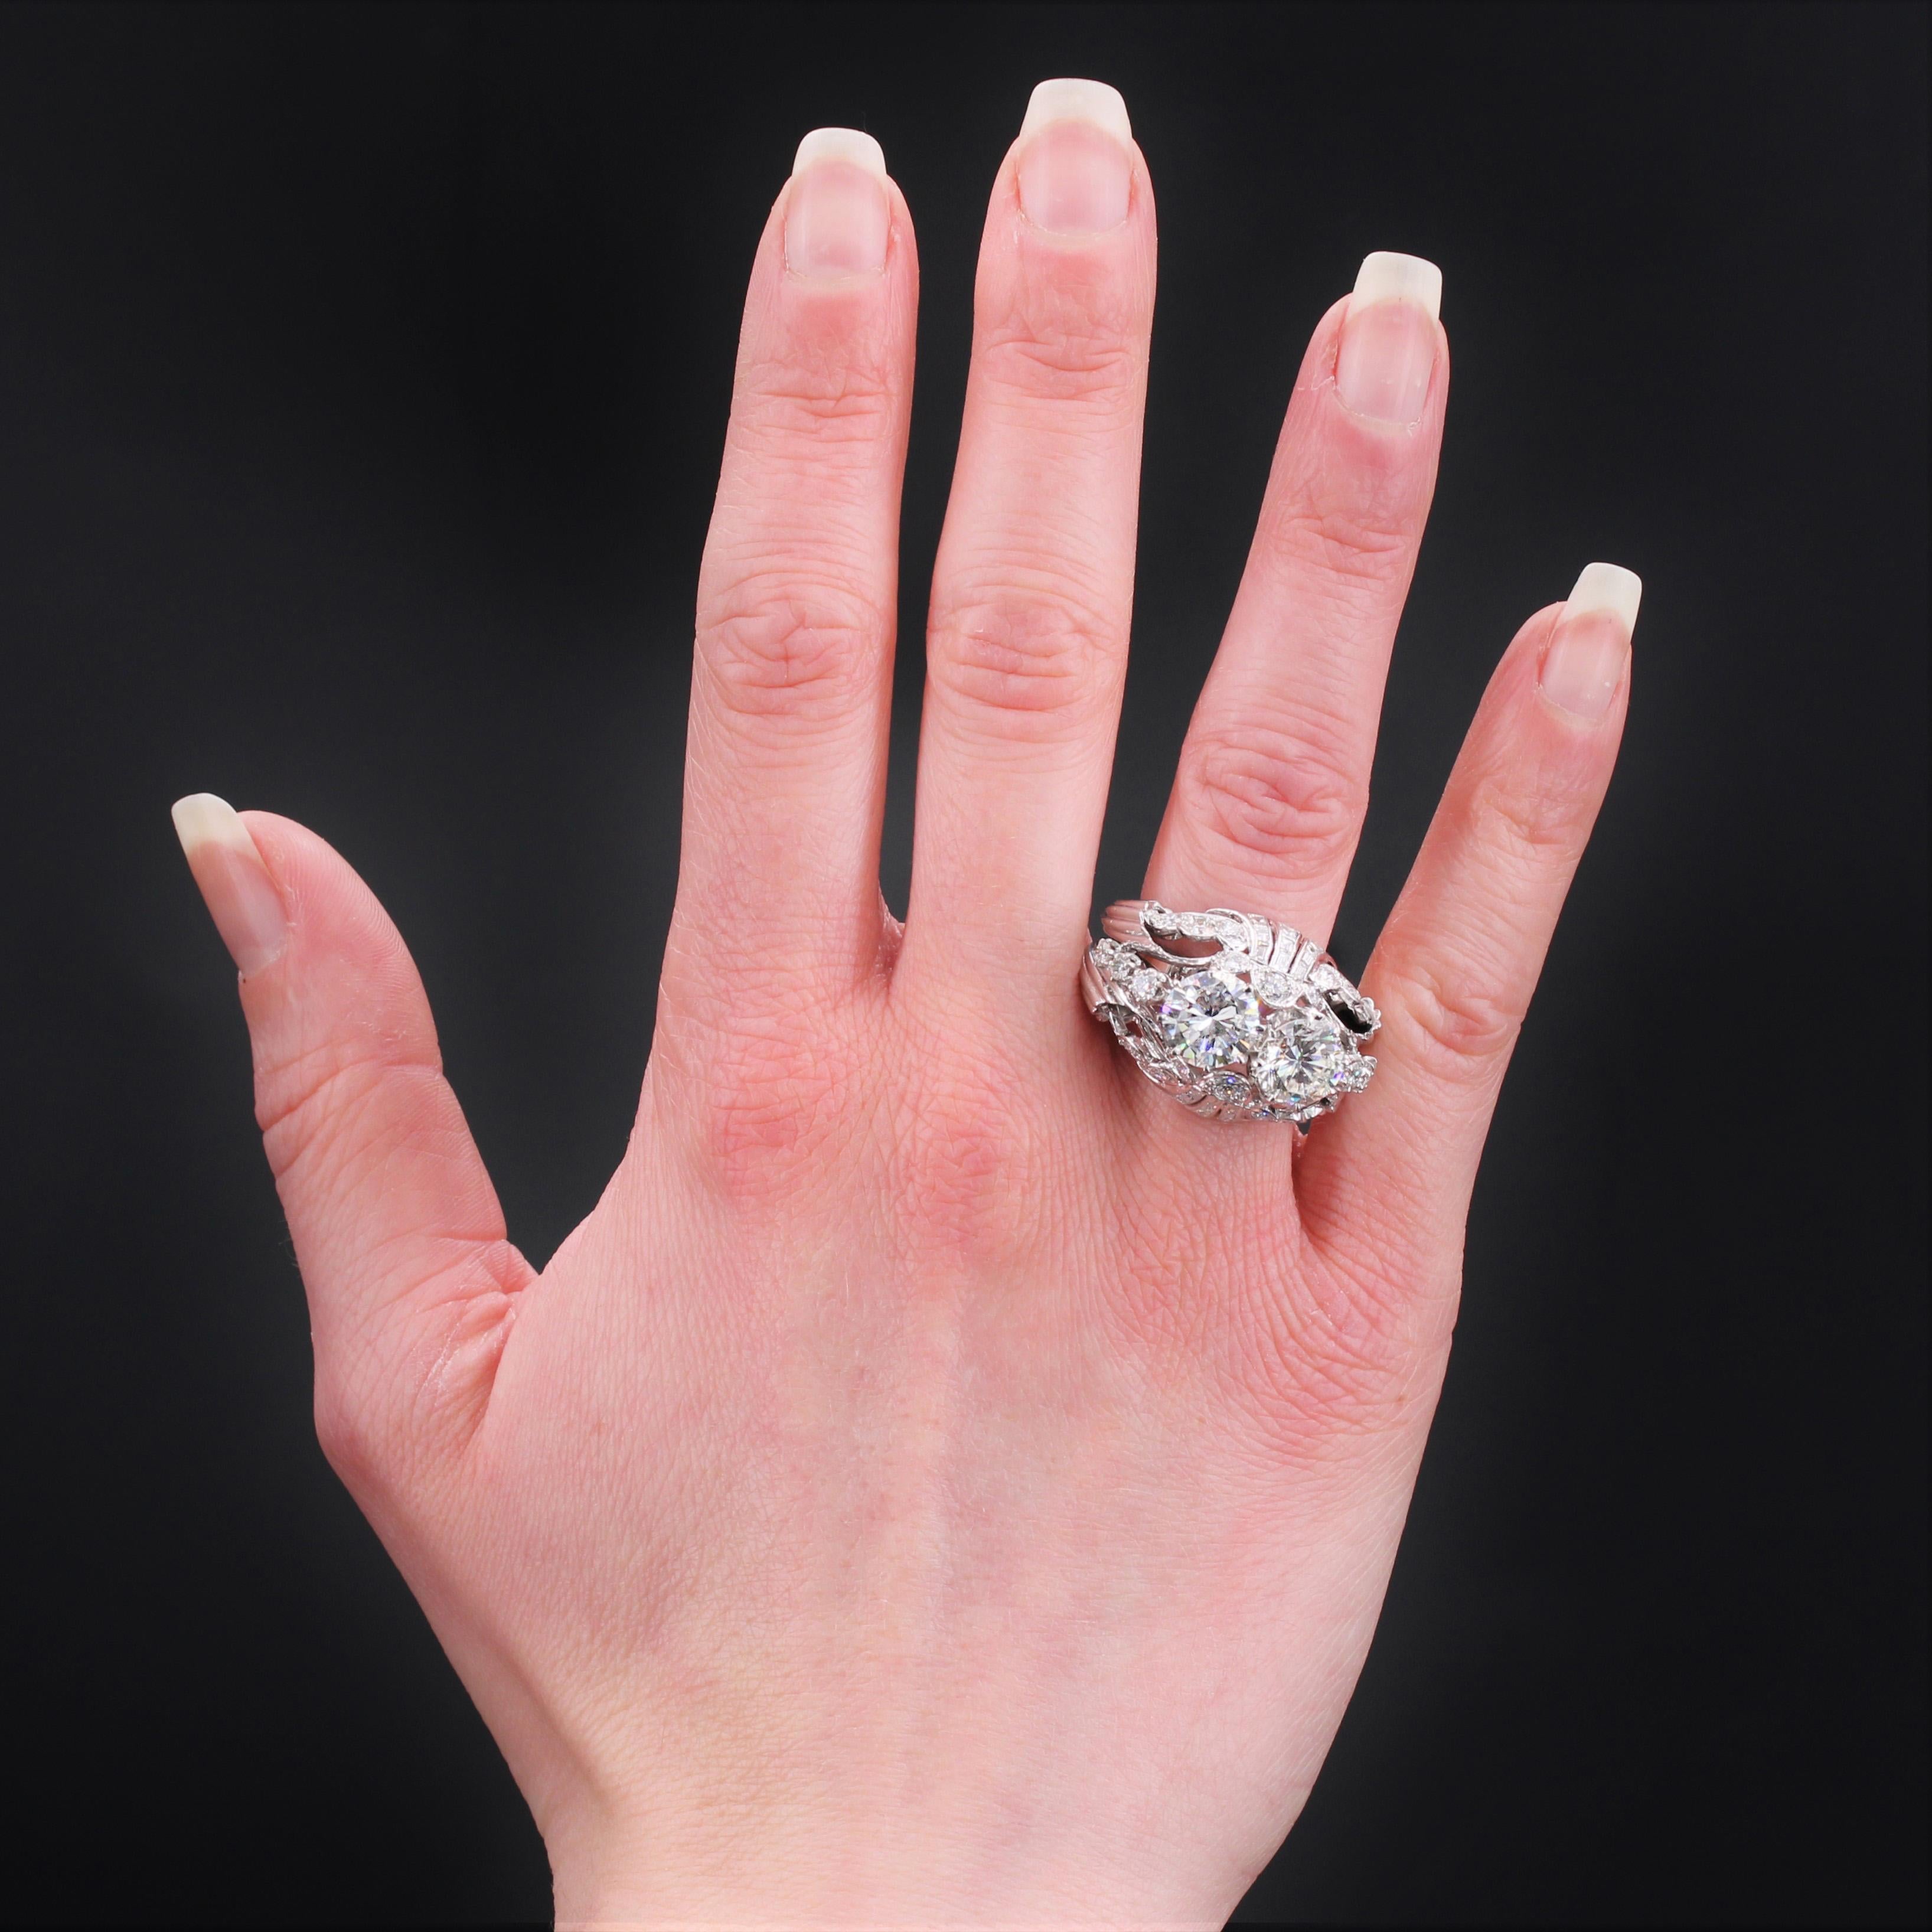 Ring in platinum, dog head hallmark.
Important openwork dome ring, it is set with claws on its top with 2 modern brilliant- cut diamonds. The top of the dome of the setting is openworked and adorned with modern brilliant- cut diamonds, baguette and